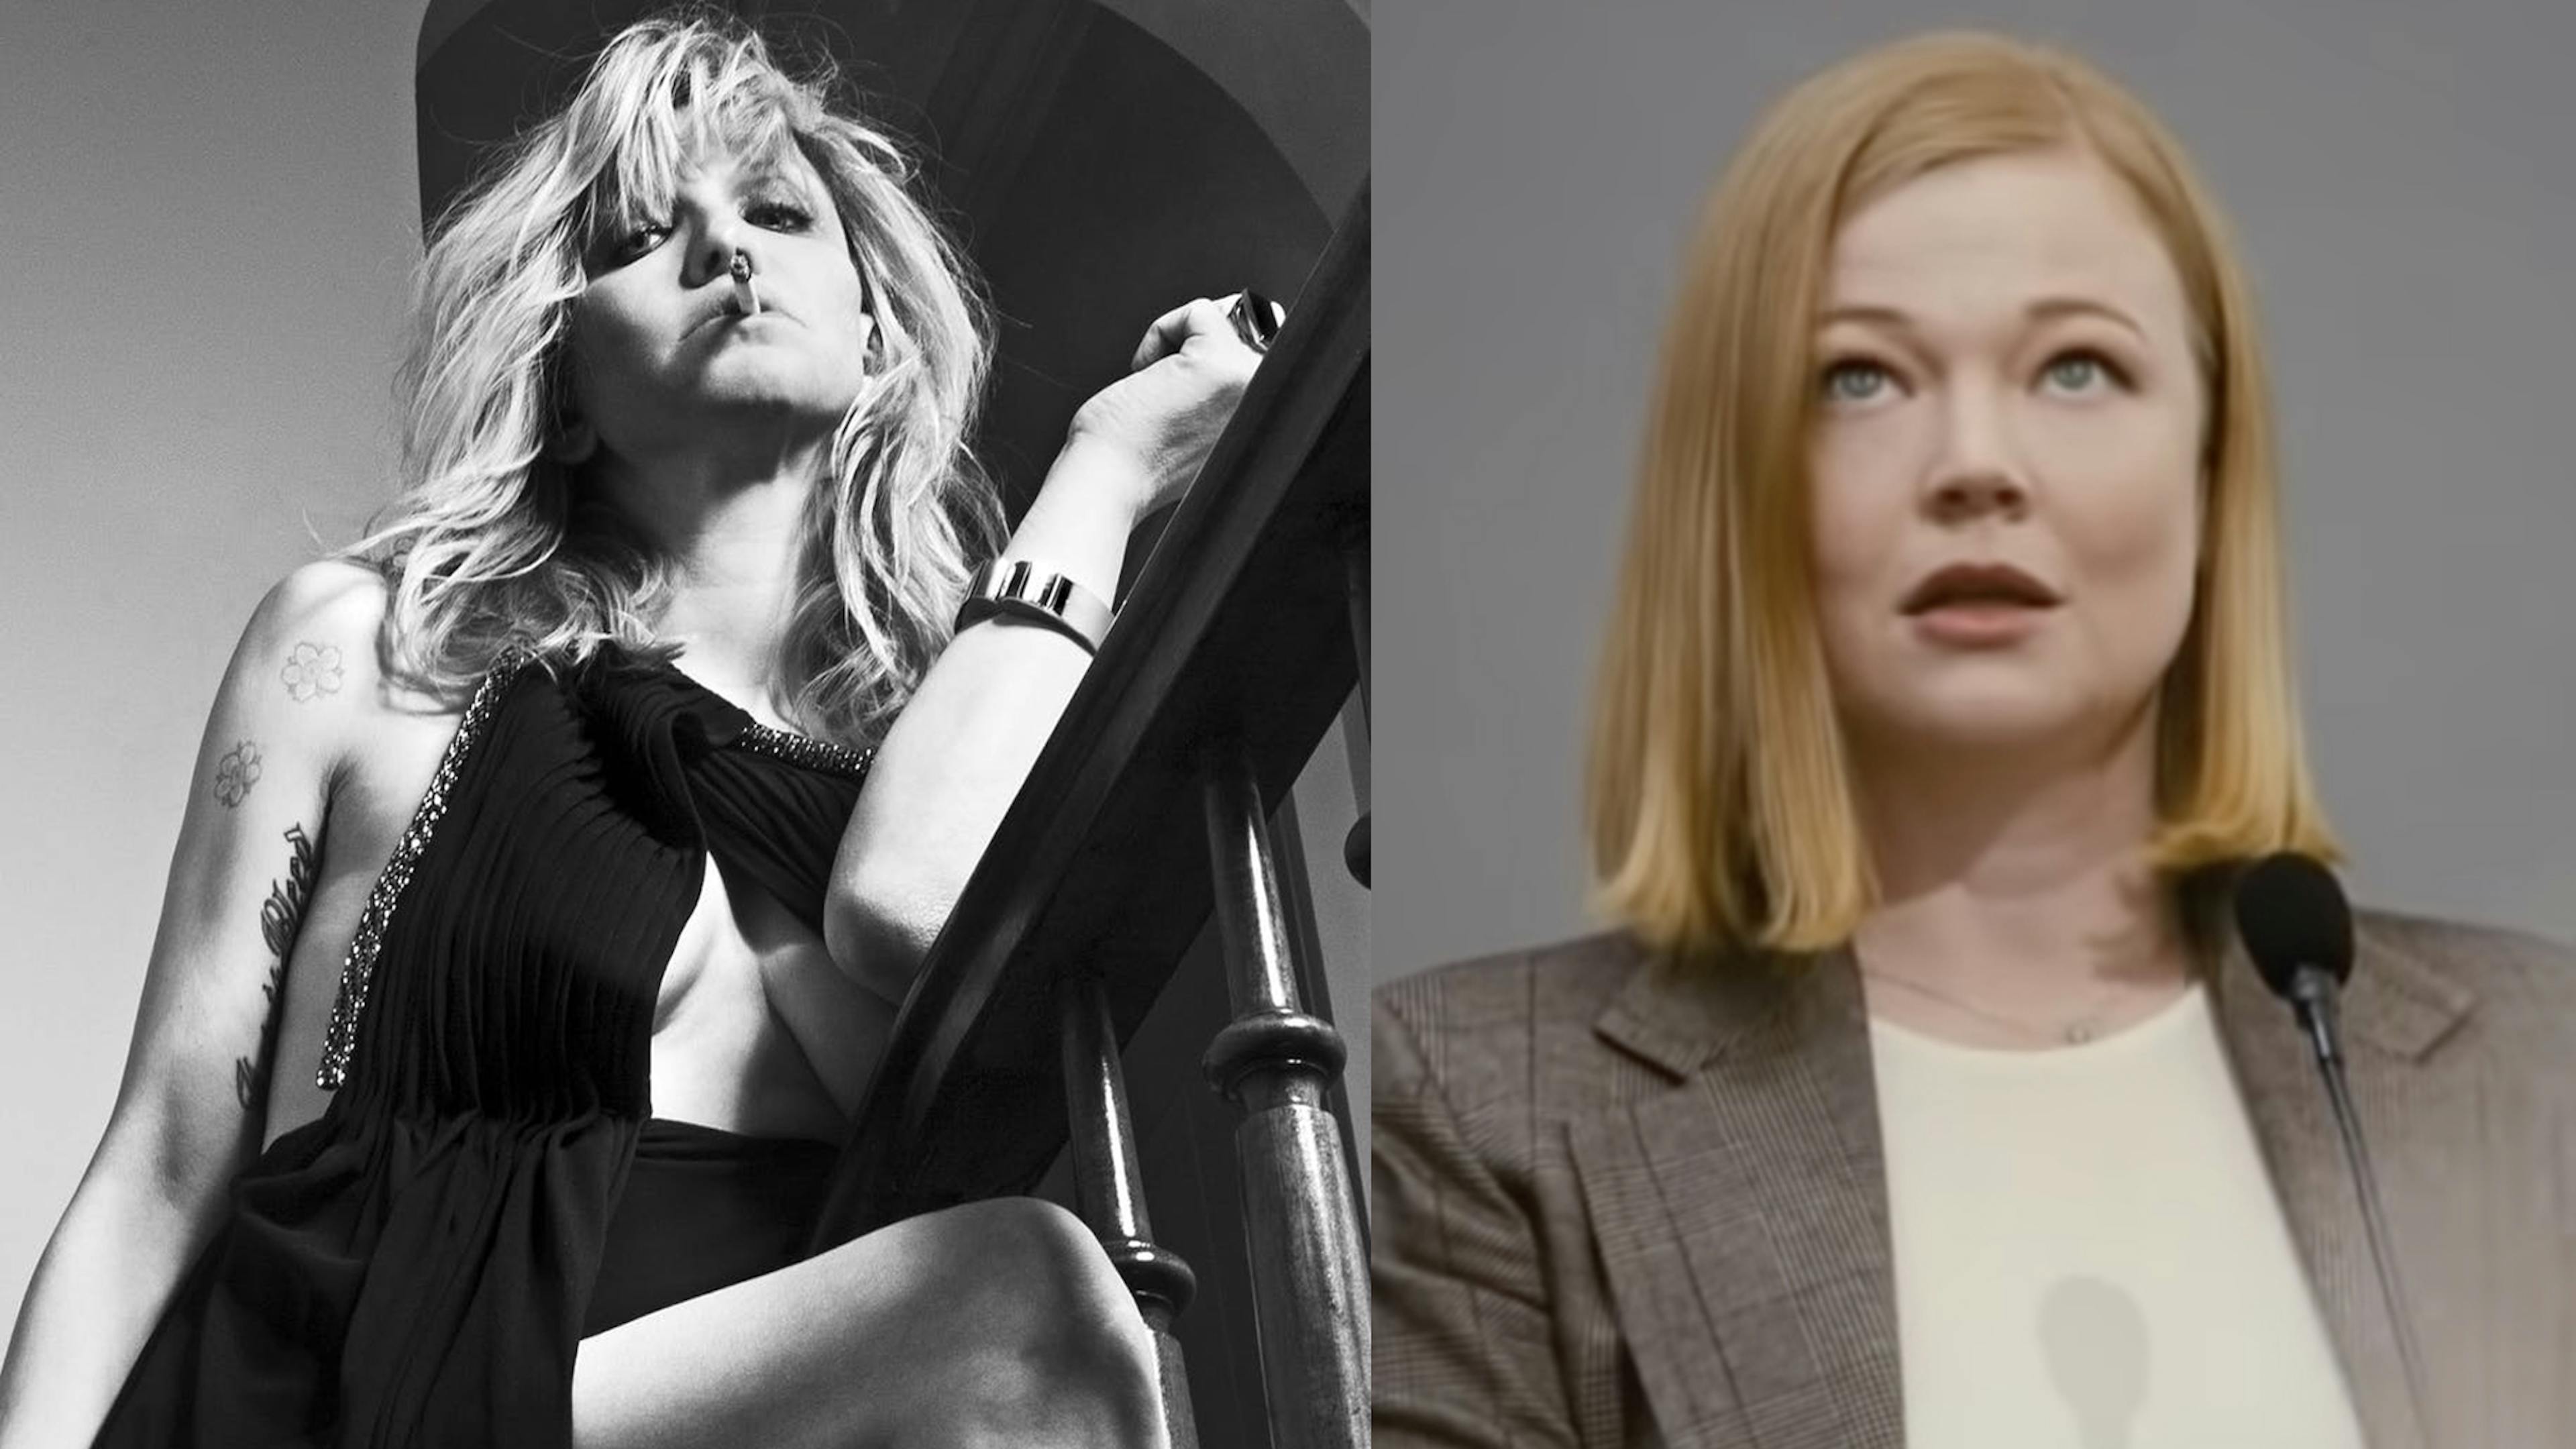 Courtney Love: Kurt would be "proud" of Rape Me being used in new episode of Succession